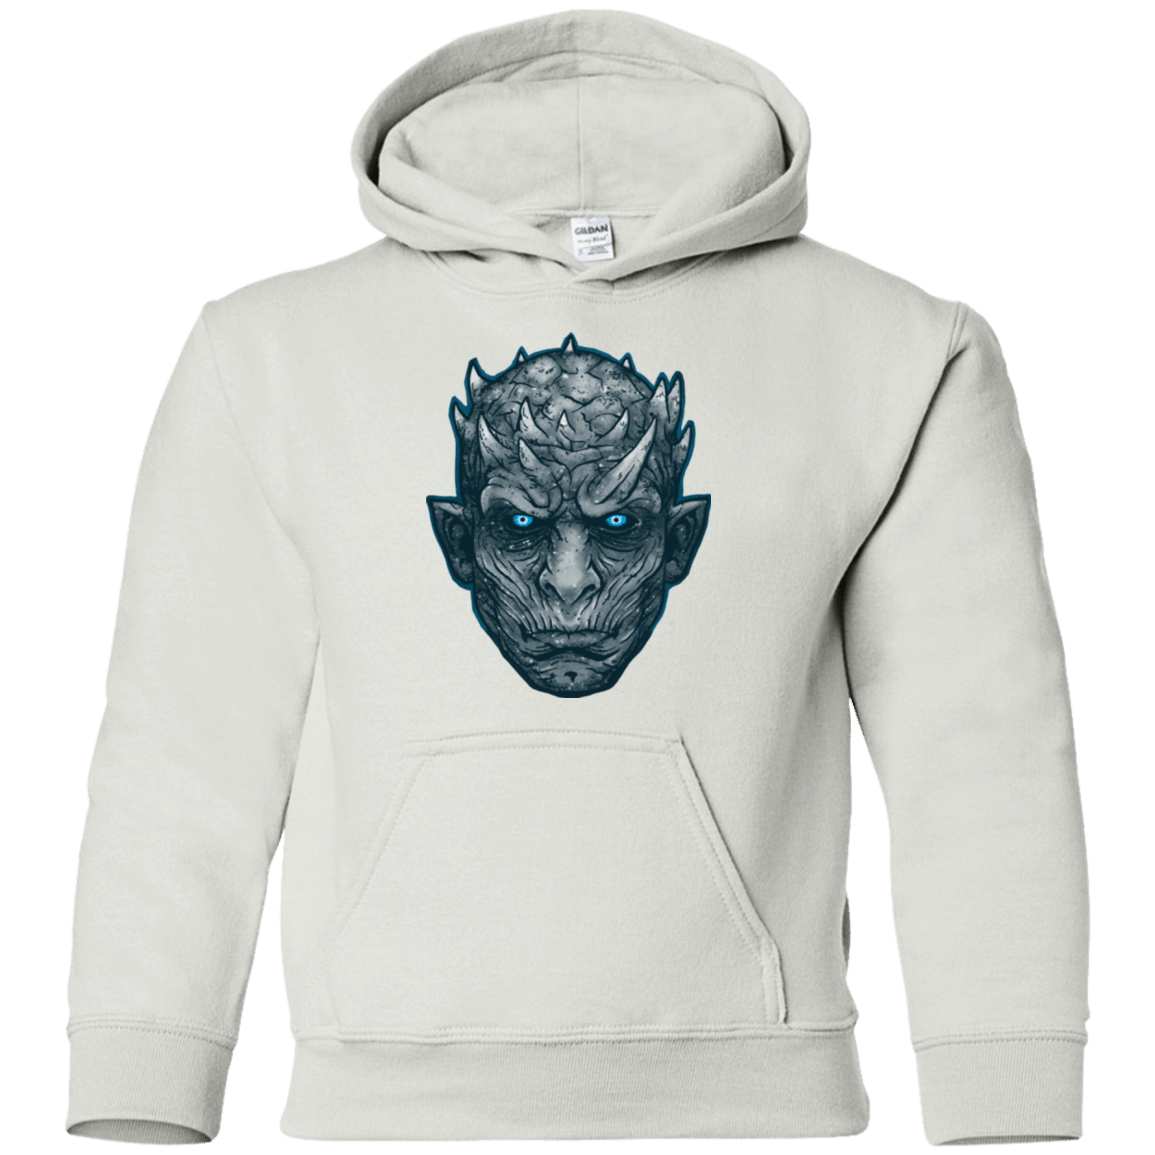 Sweatshirts White / YS The Other King2 Youth Hoodie